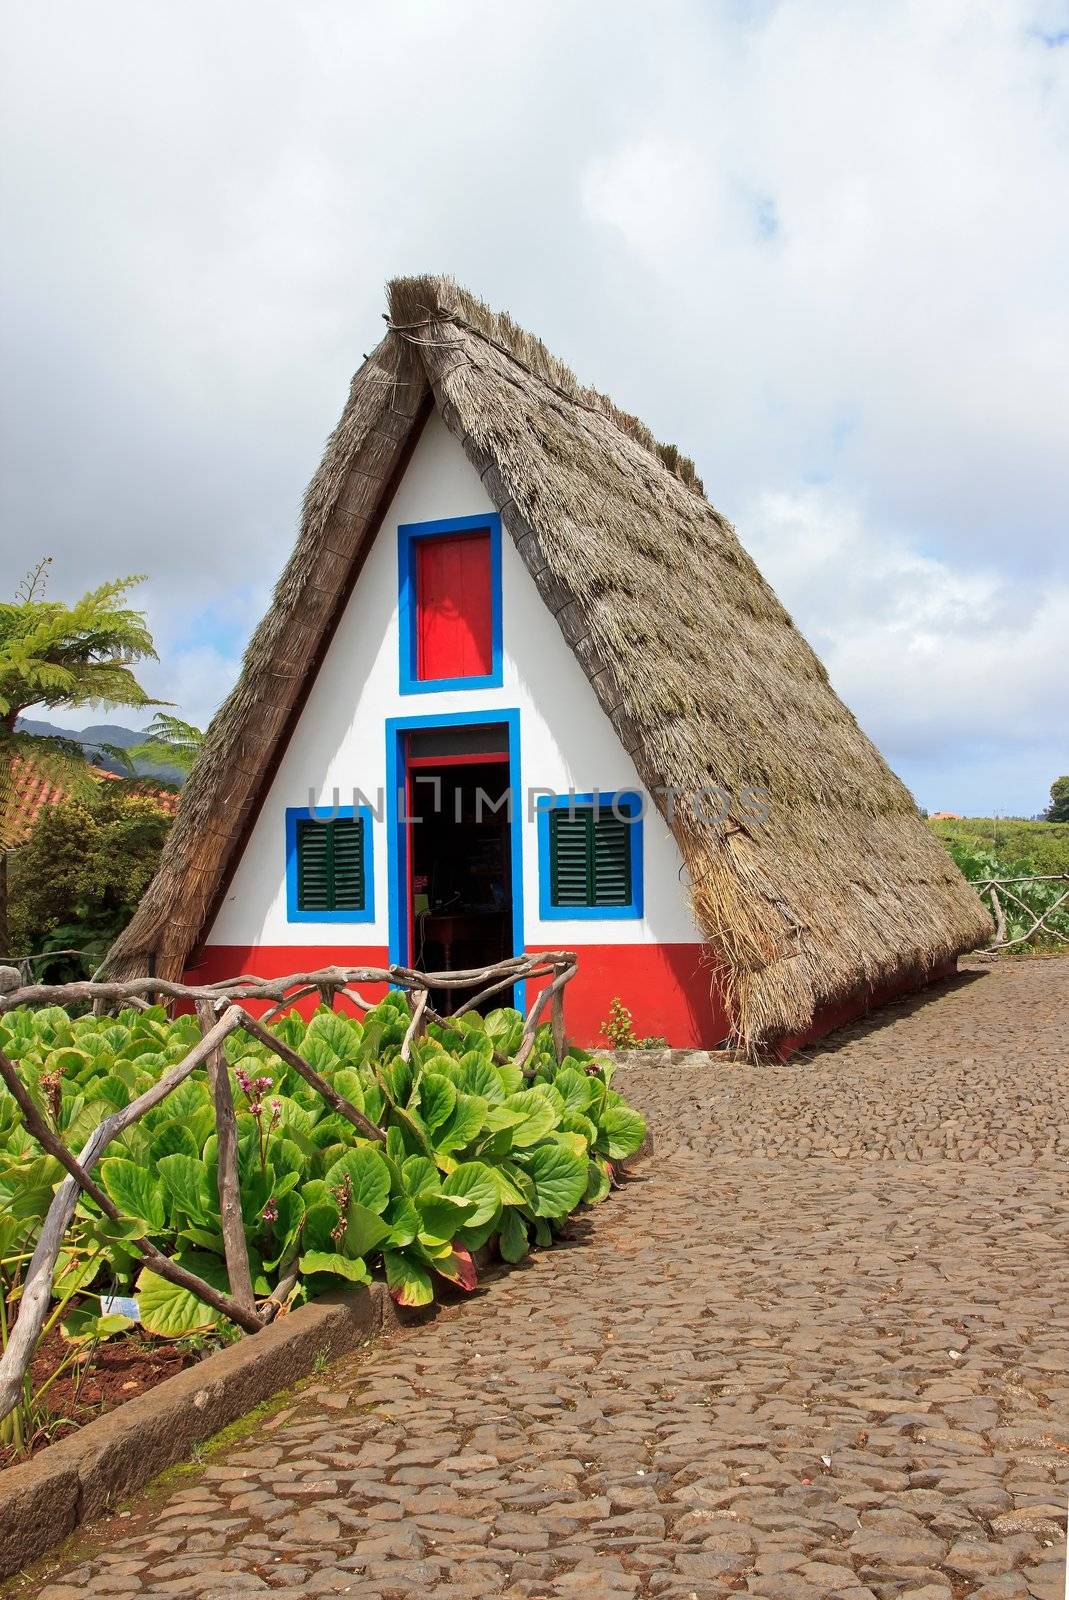 thatched roof house, typical of Madeira